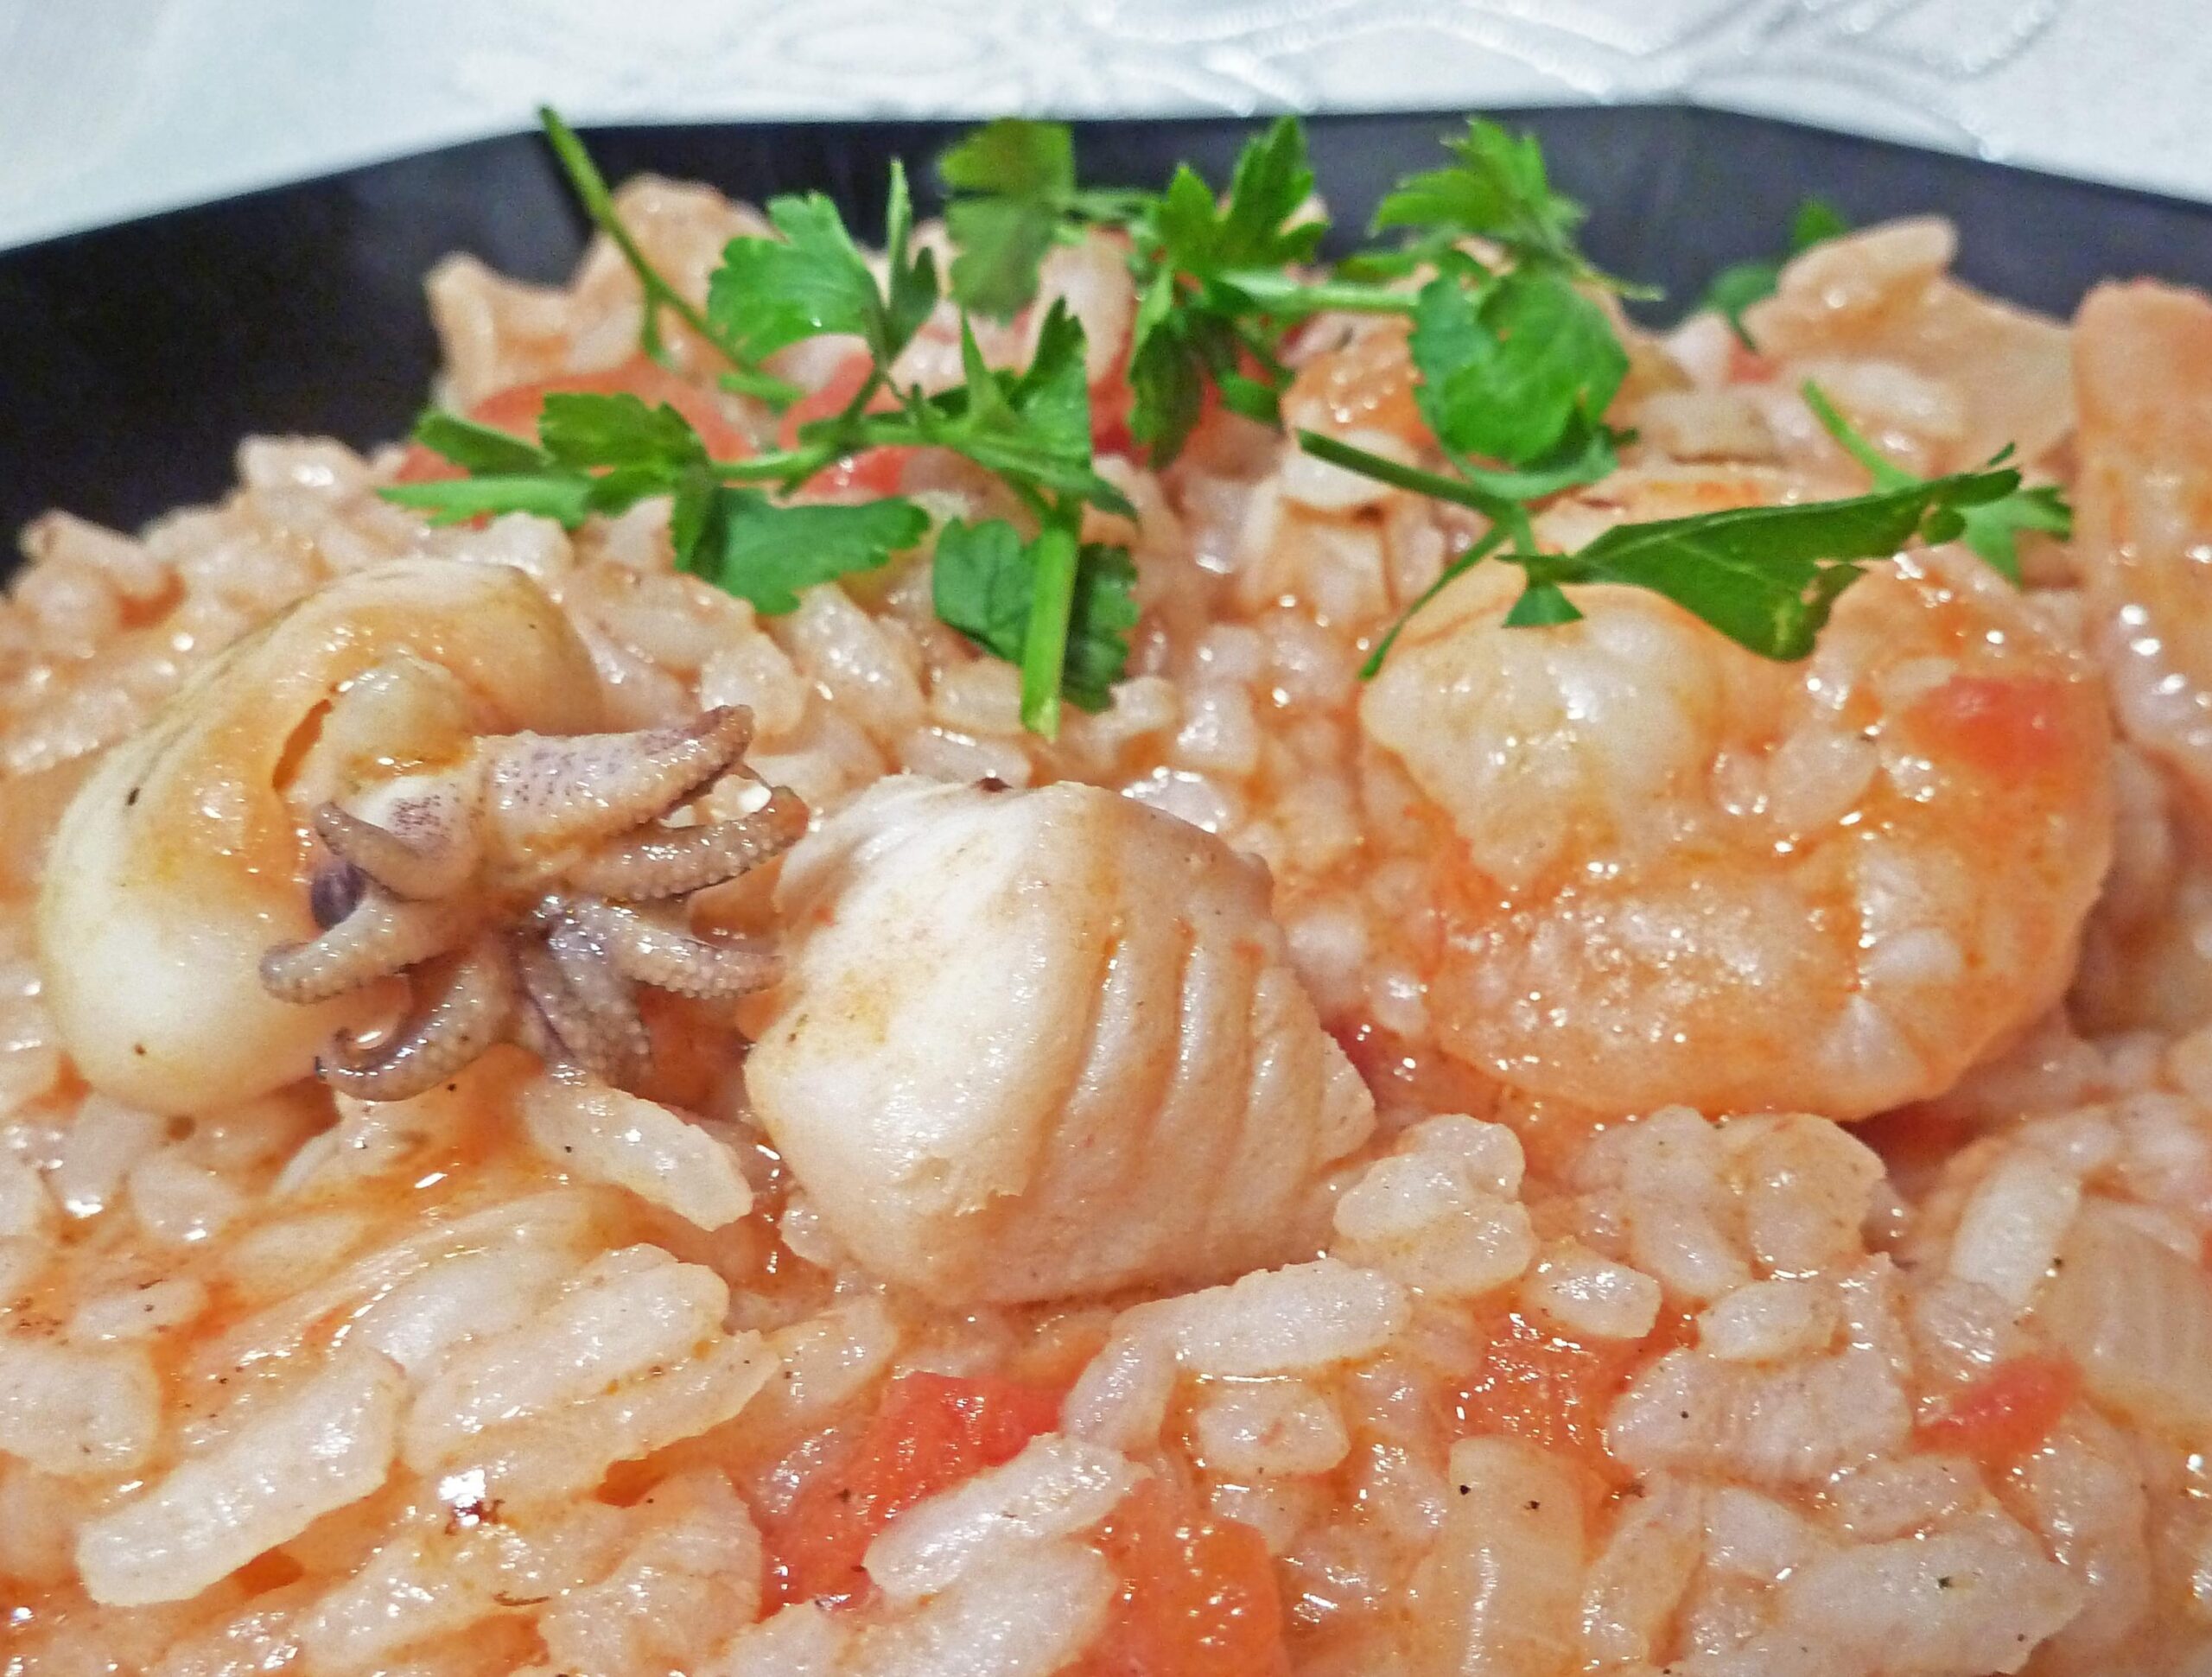  Bring the taste of Portugal into your kitchen with this seafood rice dish.